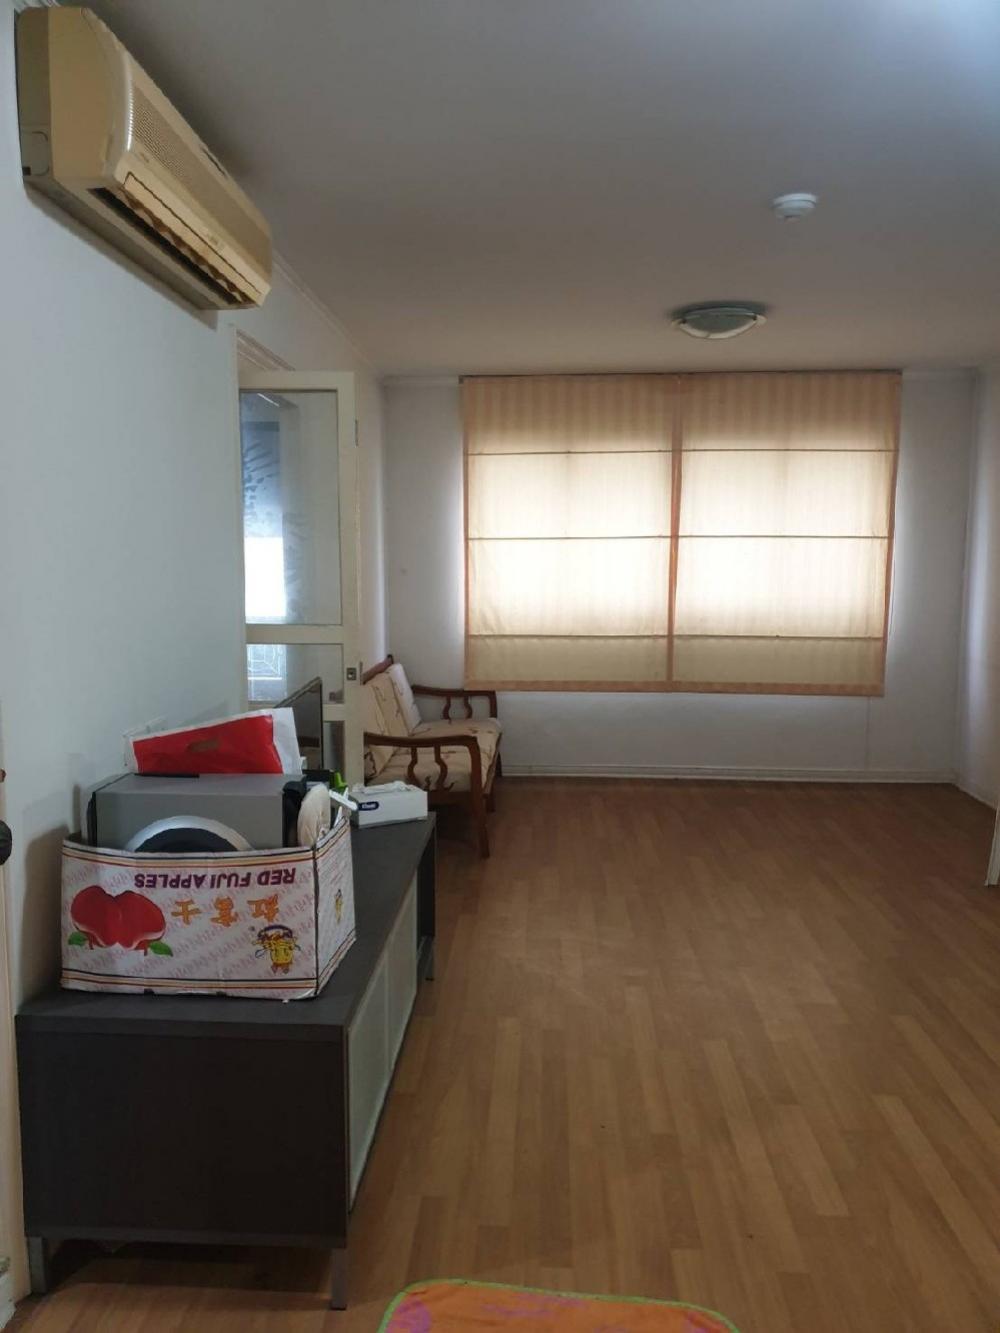 For SaleCondoRama3 (Riverside),Satupadit : (b944) Condo for sale, Lumpini Place Rama 3 - Charoenkrung, room size 63 sqm., 8th floor, Building B, free!!!!! Air conditioner in all rooms